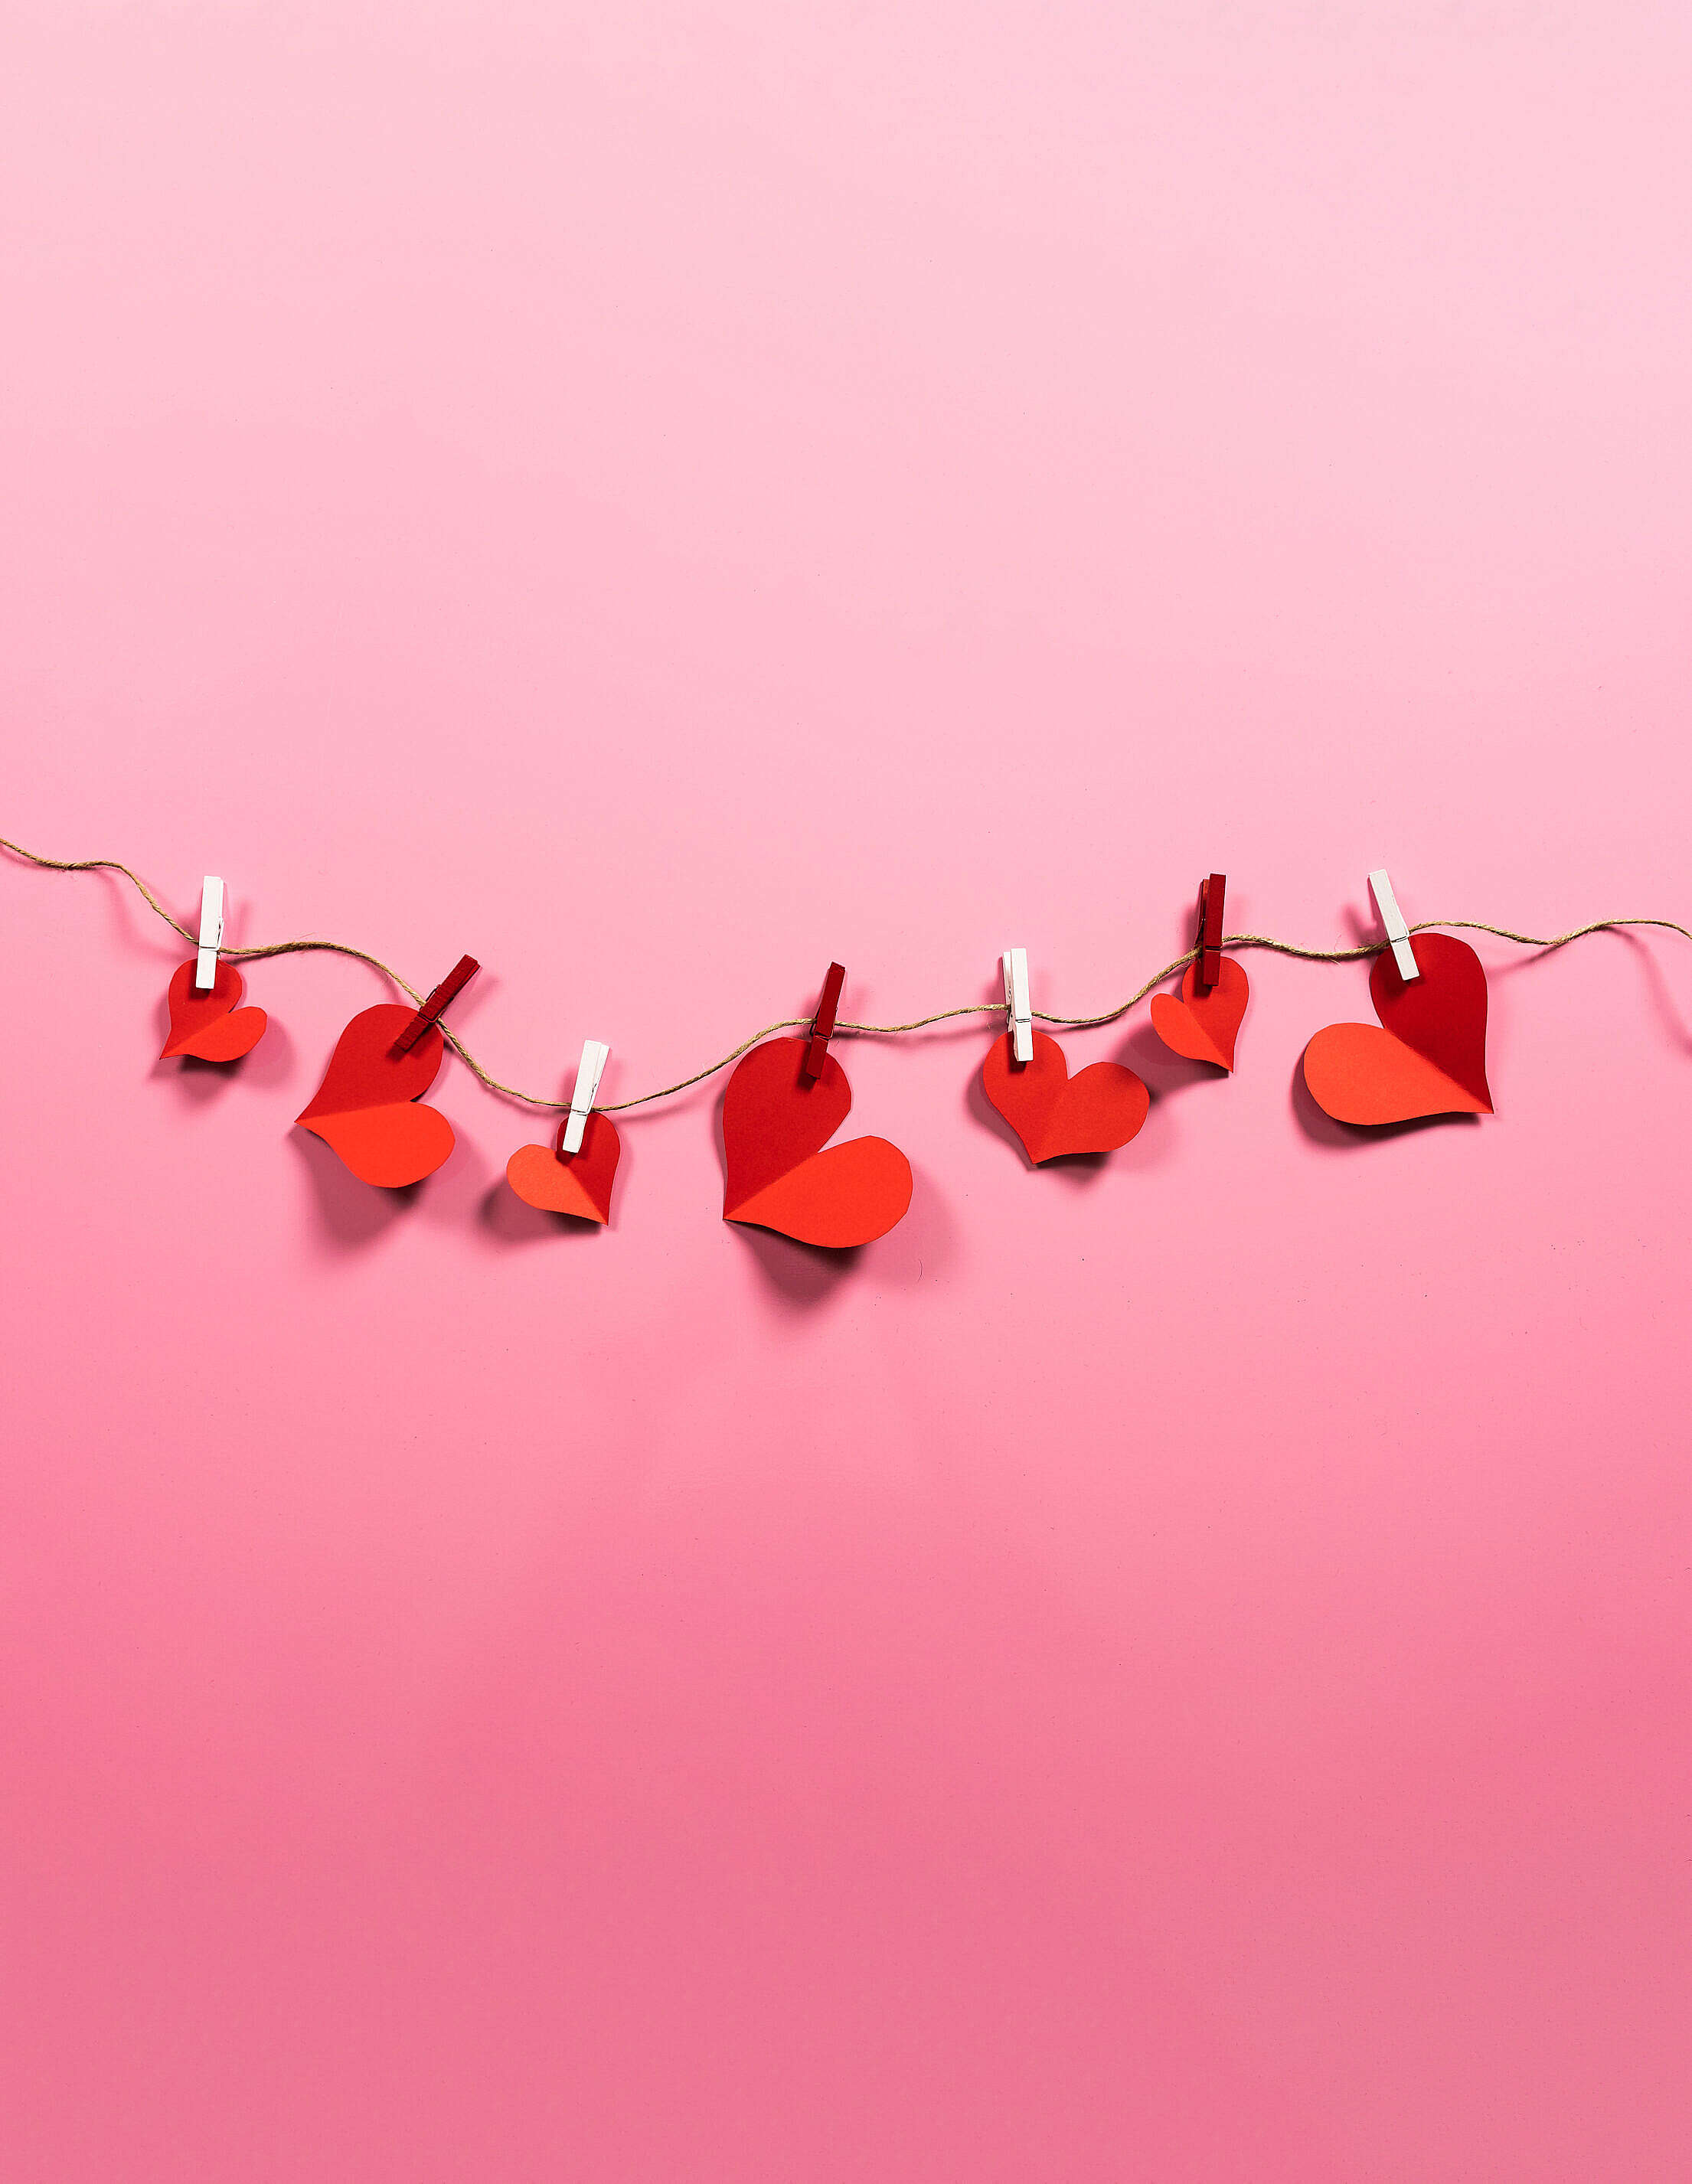 Romantic Love Paper Red Hearts Hanging on a String Free Stock Photo